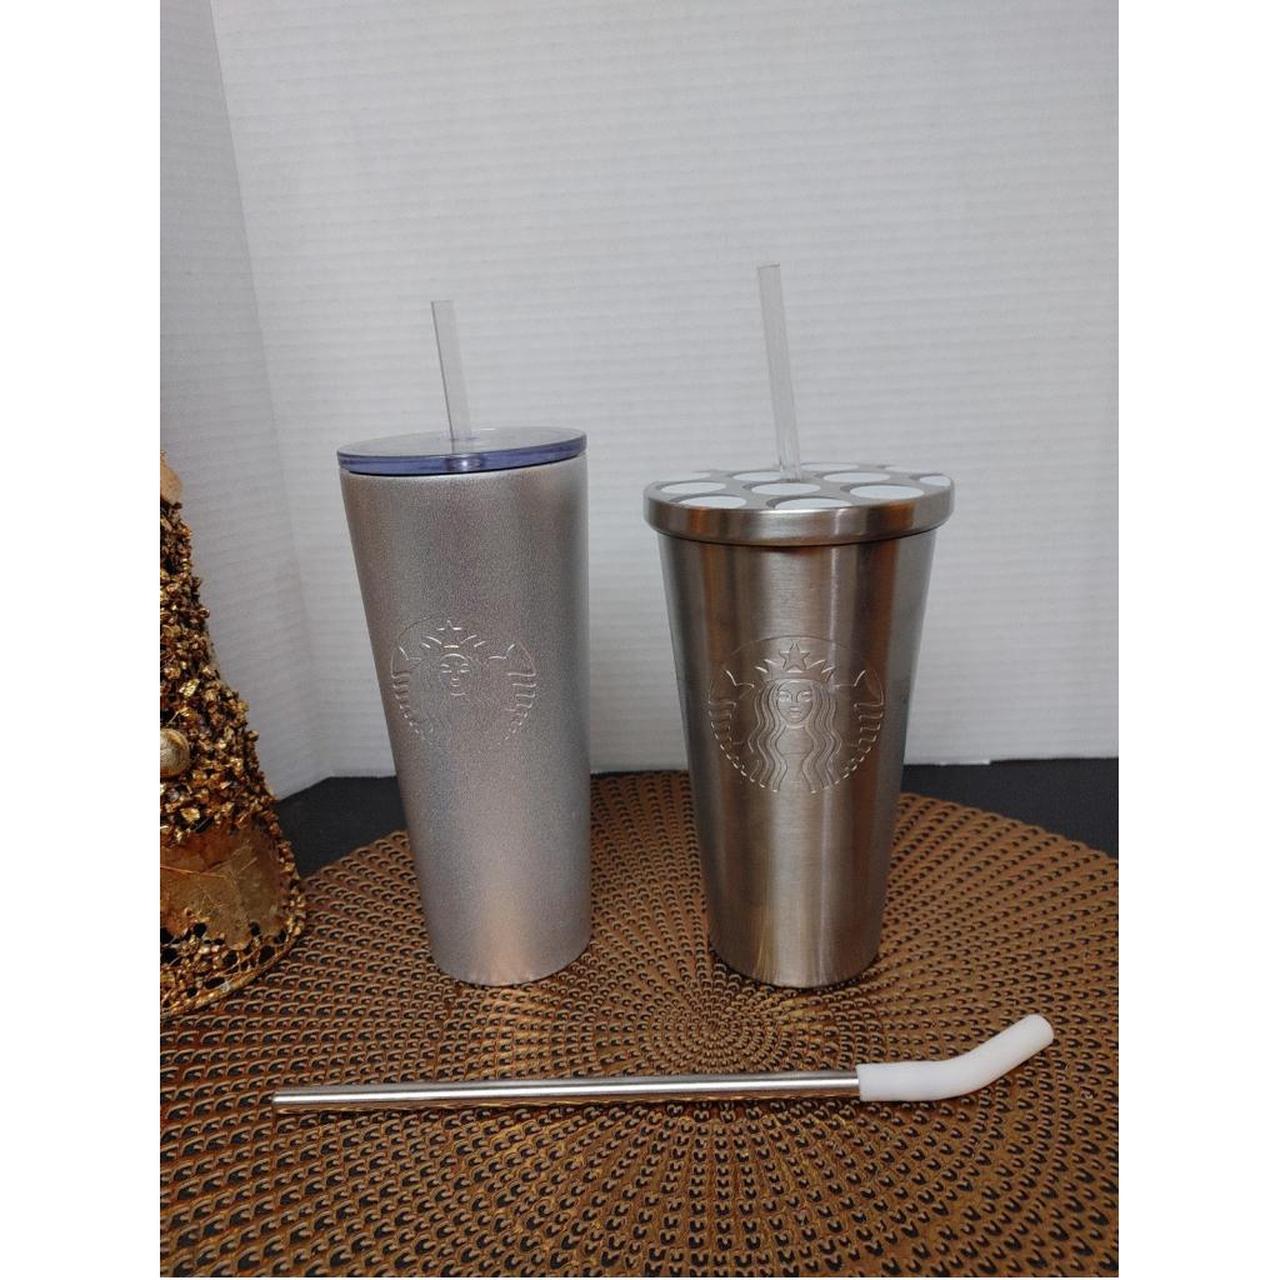 Starbucks stainless 24 oz water tumblers with straws - Depop